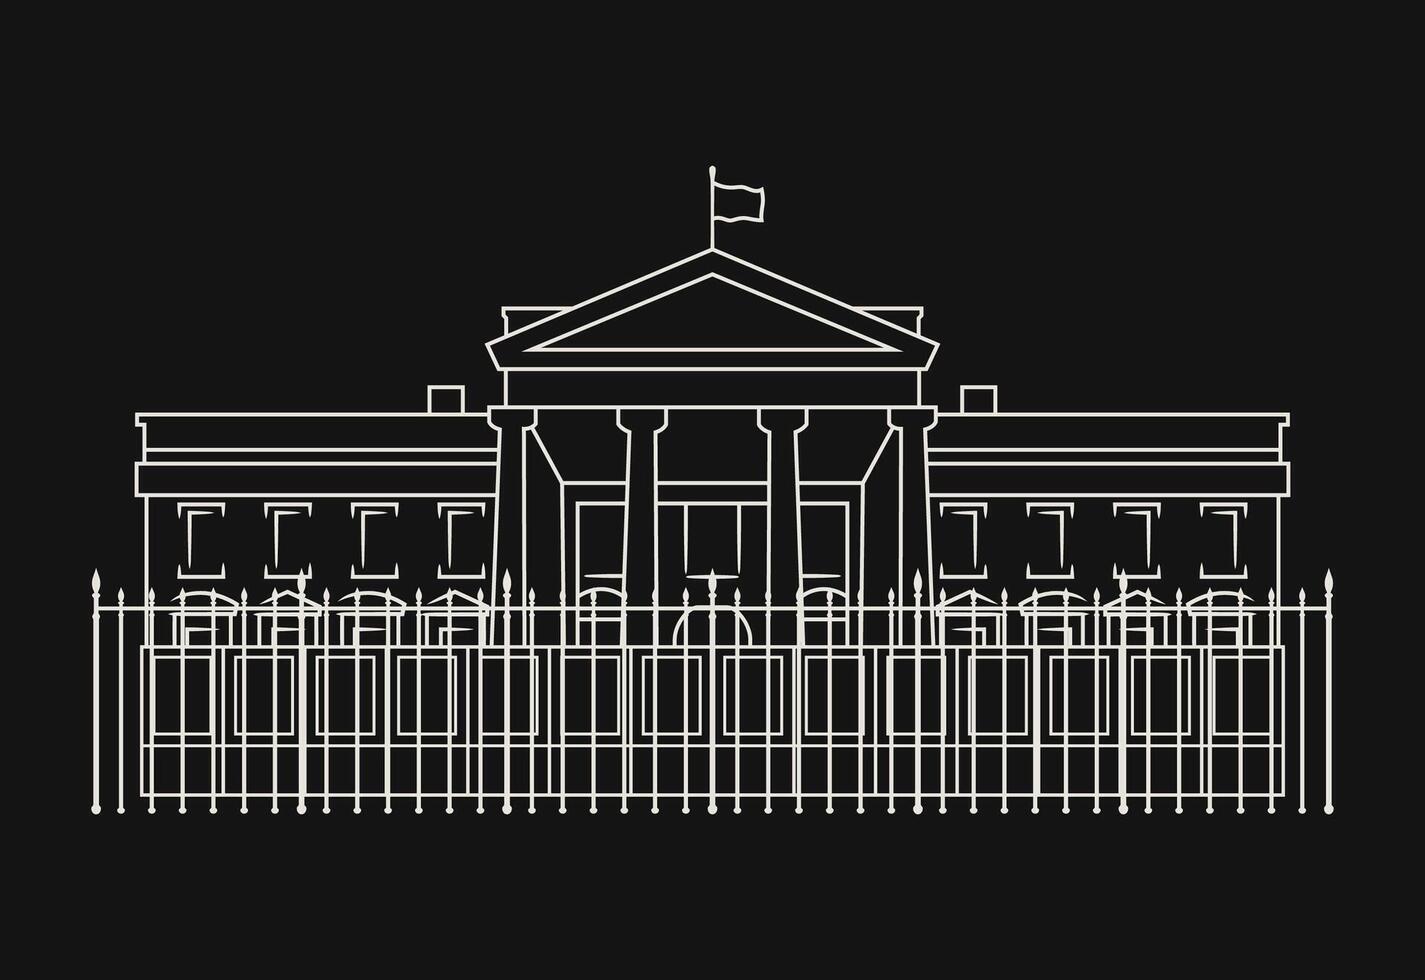 A minimalist black and white line drawing of the White House vector